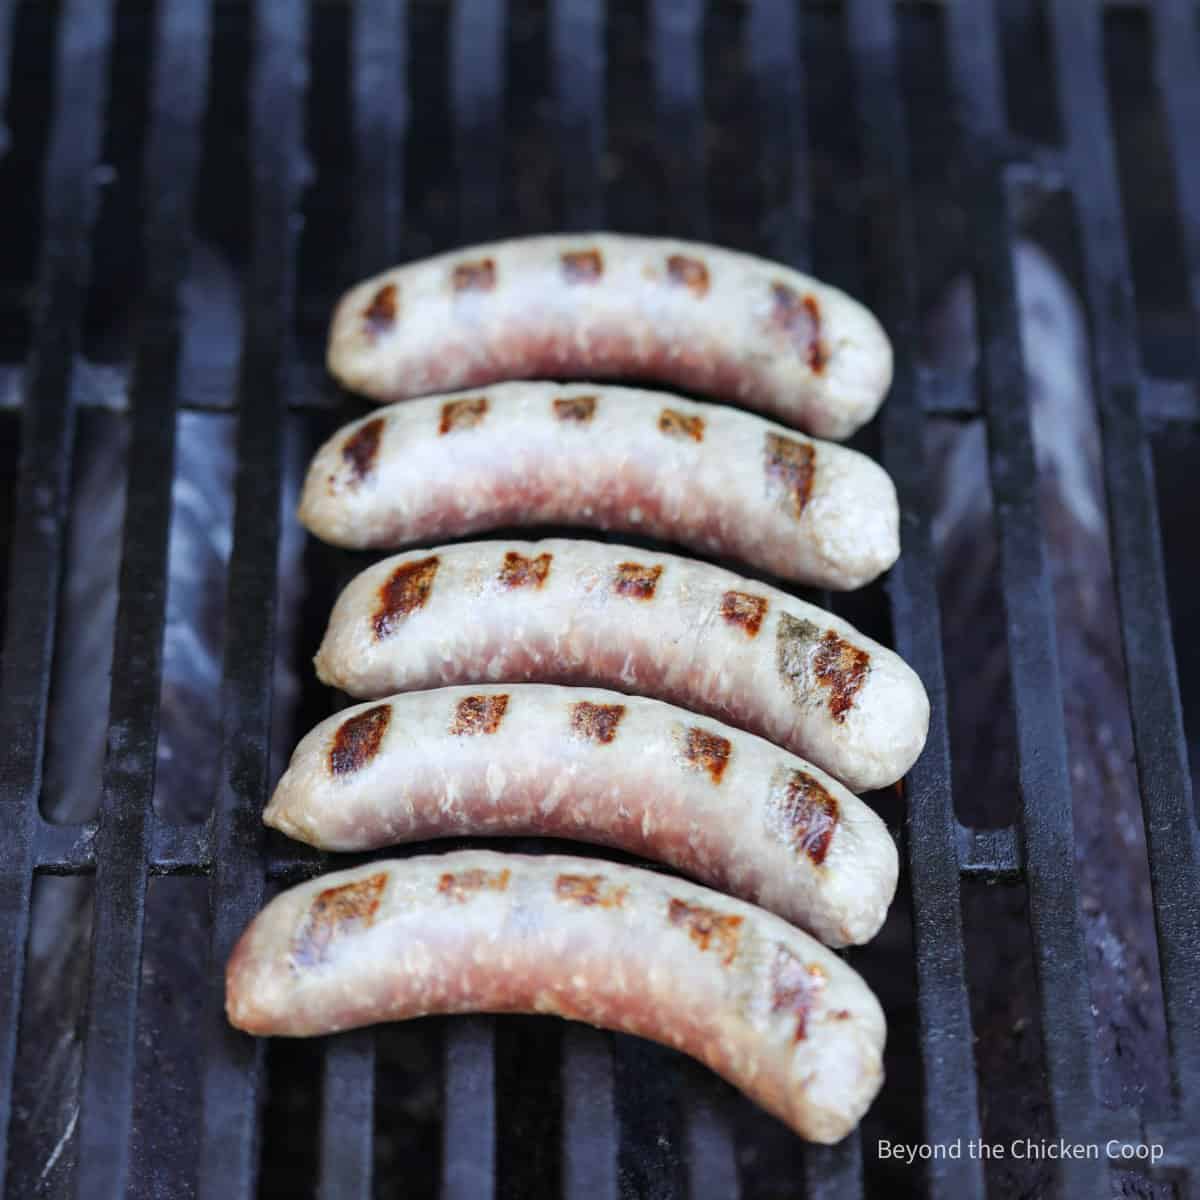 Sausages cooked on one side.